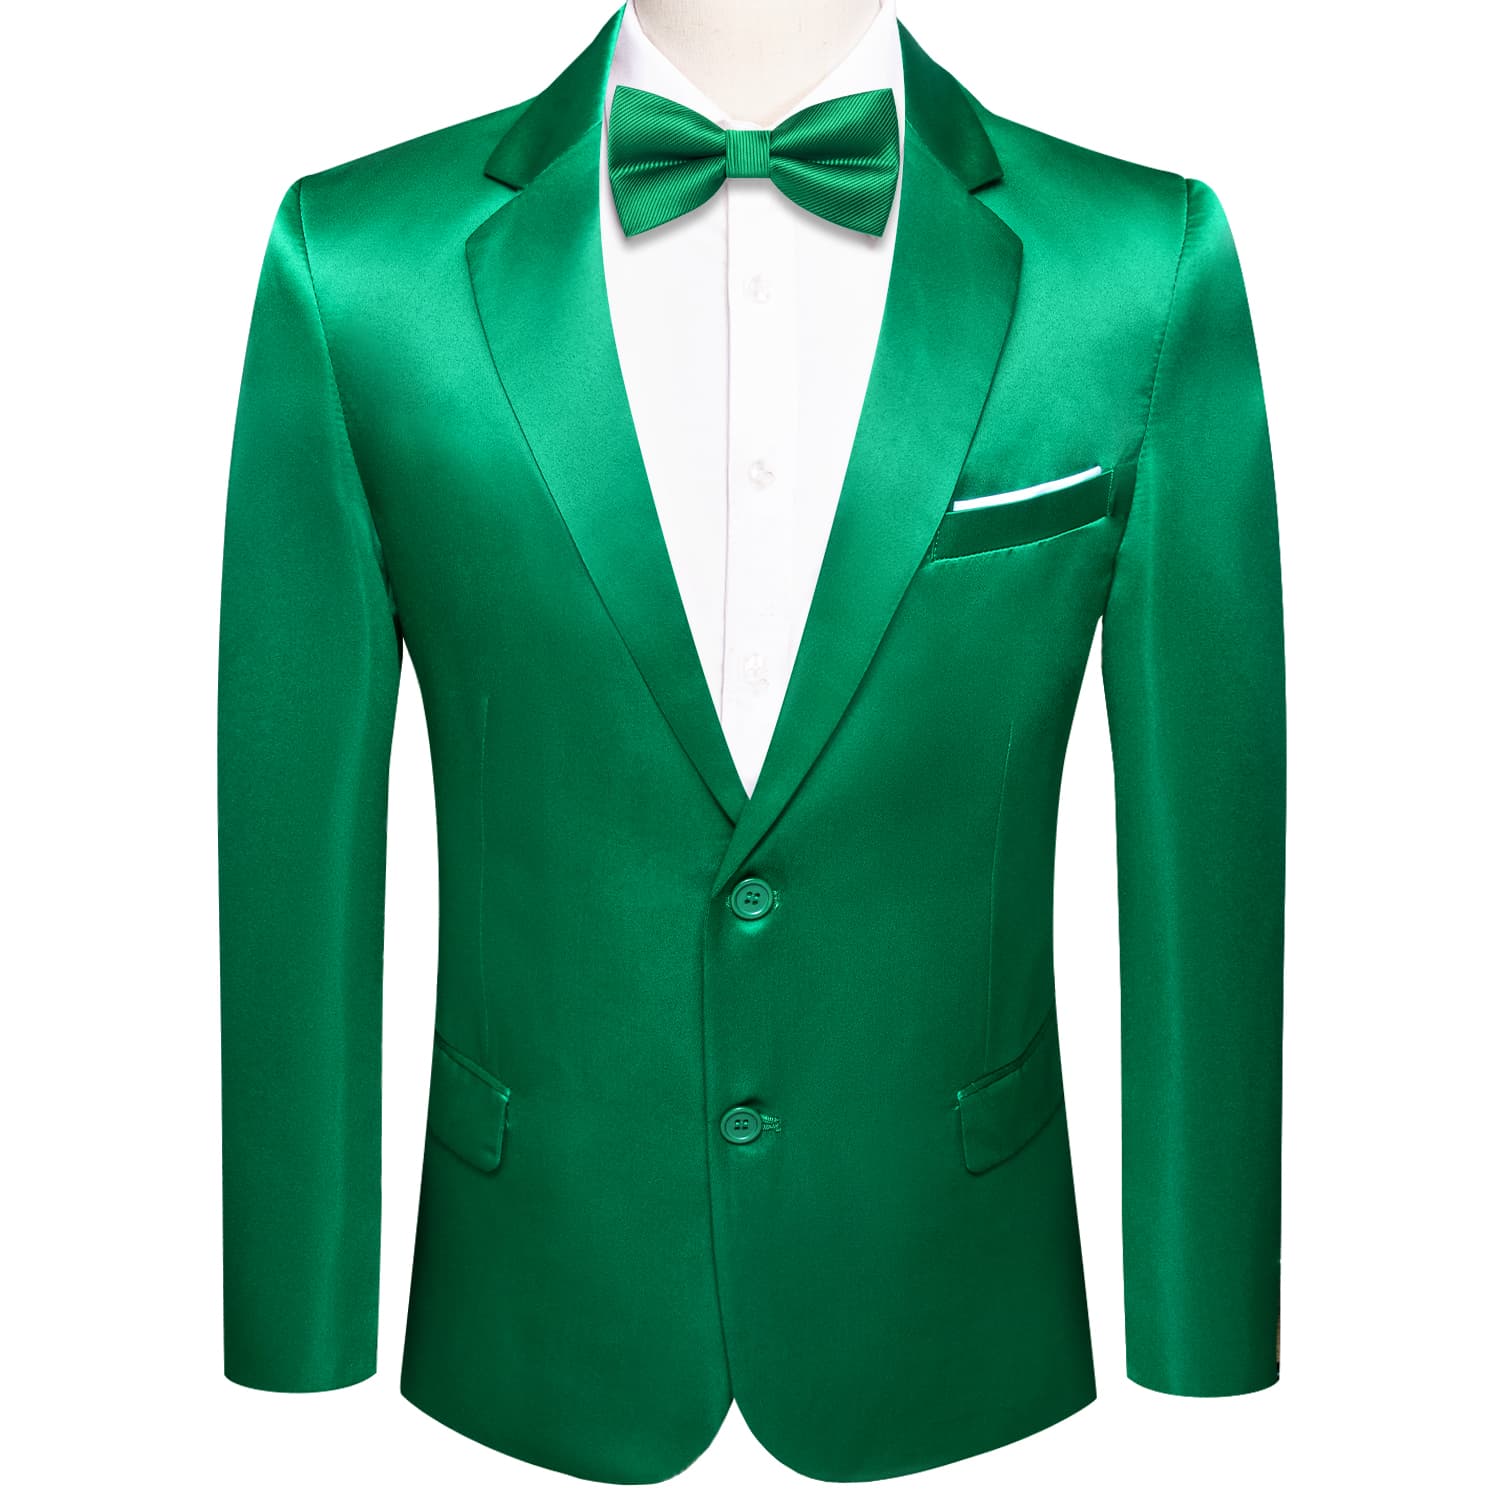  Blazer Forest Green Party Solid Top Men Suit